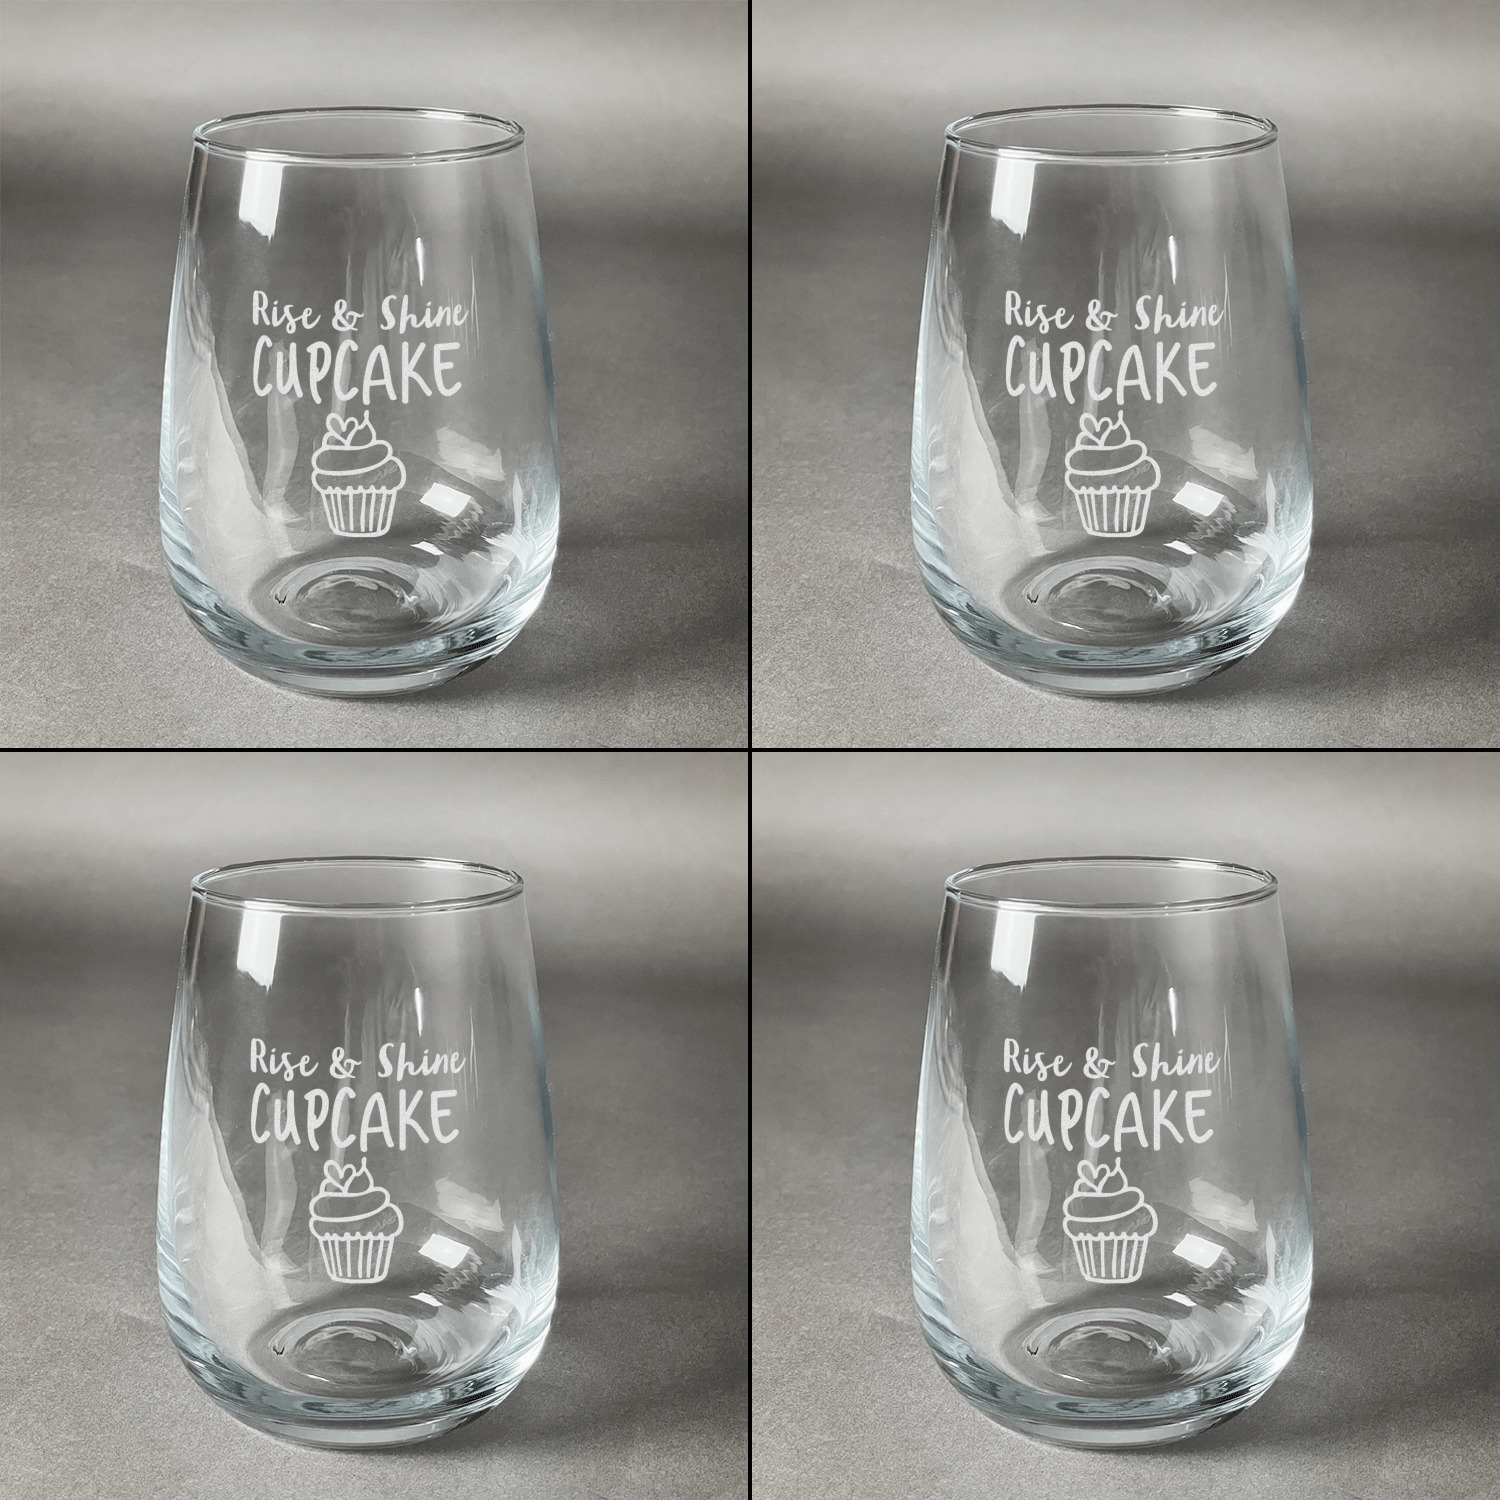 Cute Quotes and Sayings Design Custom Wine Glass - Laser Engraved